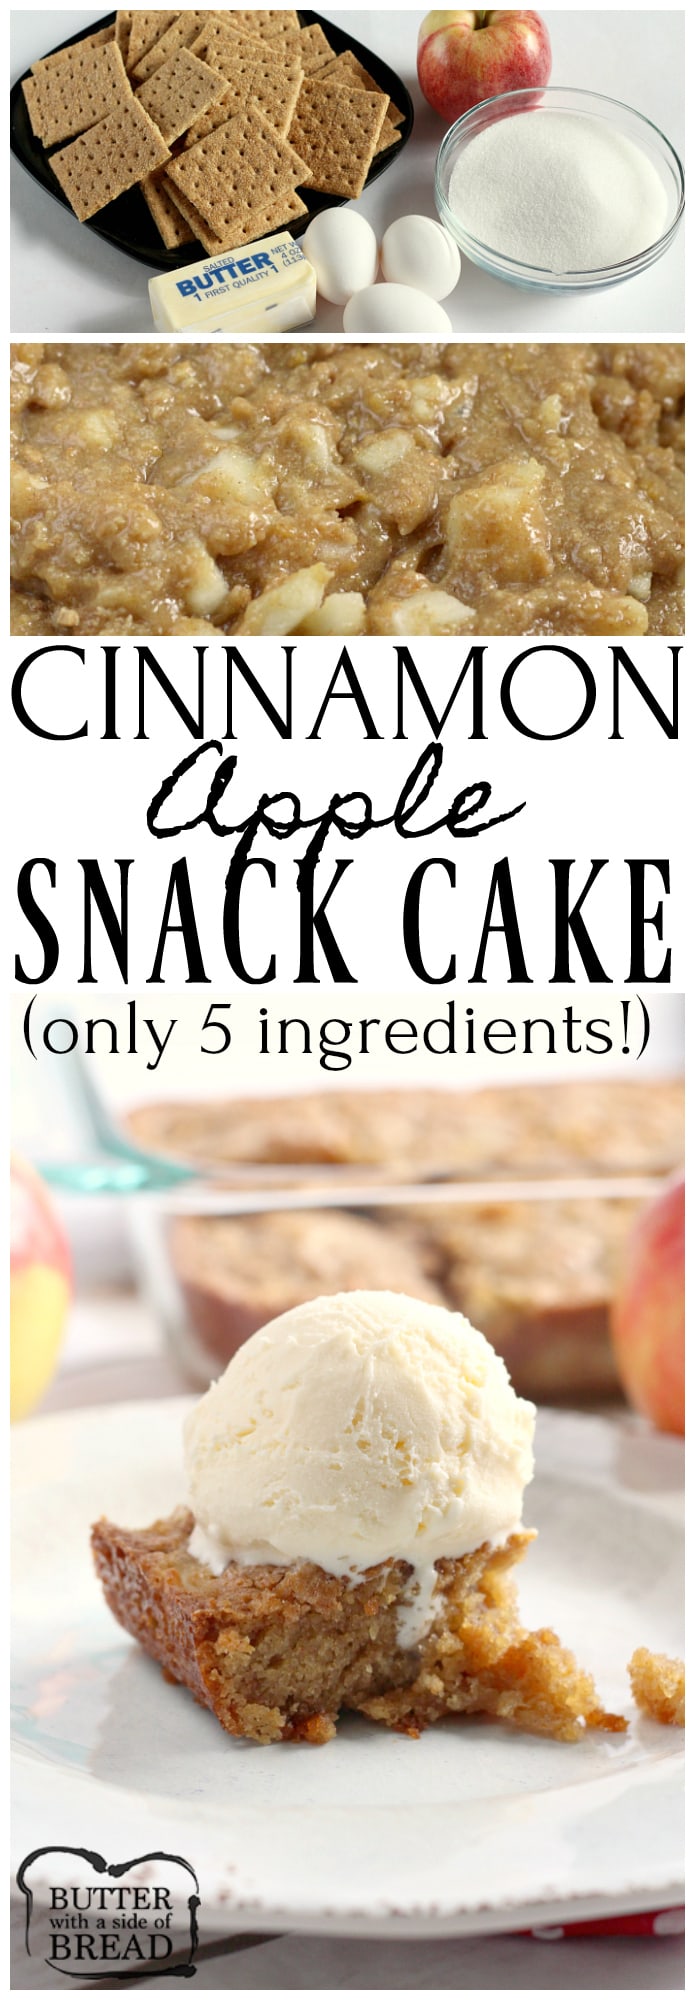 Cinnamon Apple Snack Cake is made with graham cracker crumbs, chopped apples and just three other basic ingredients! This cake is so moist and delicious - no one will believe how easy it is to make!